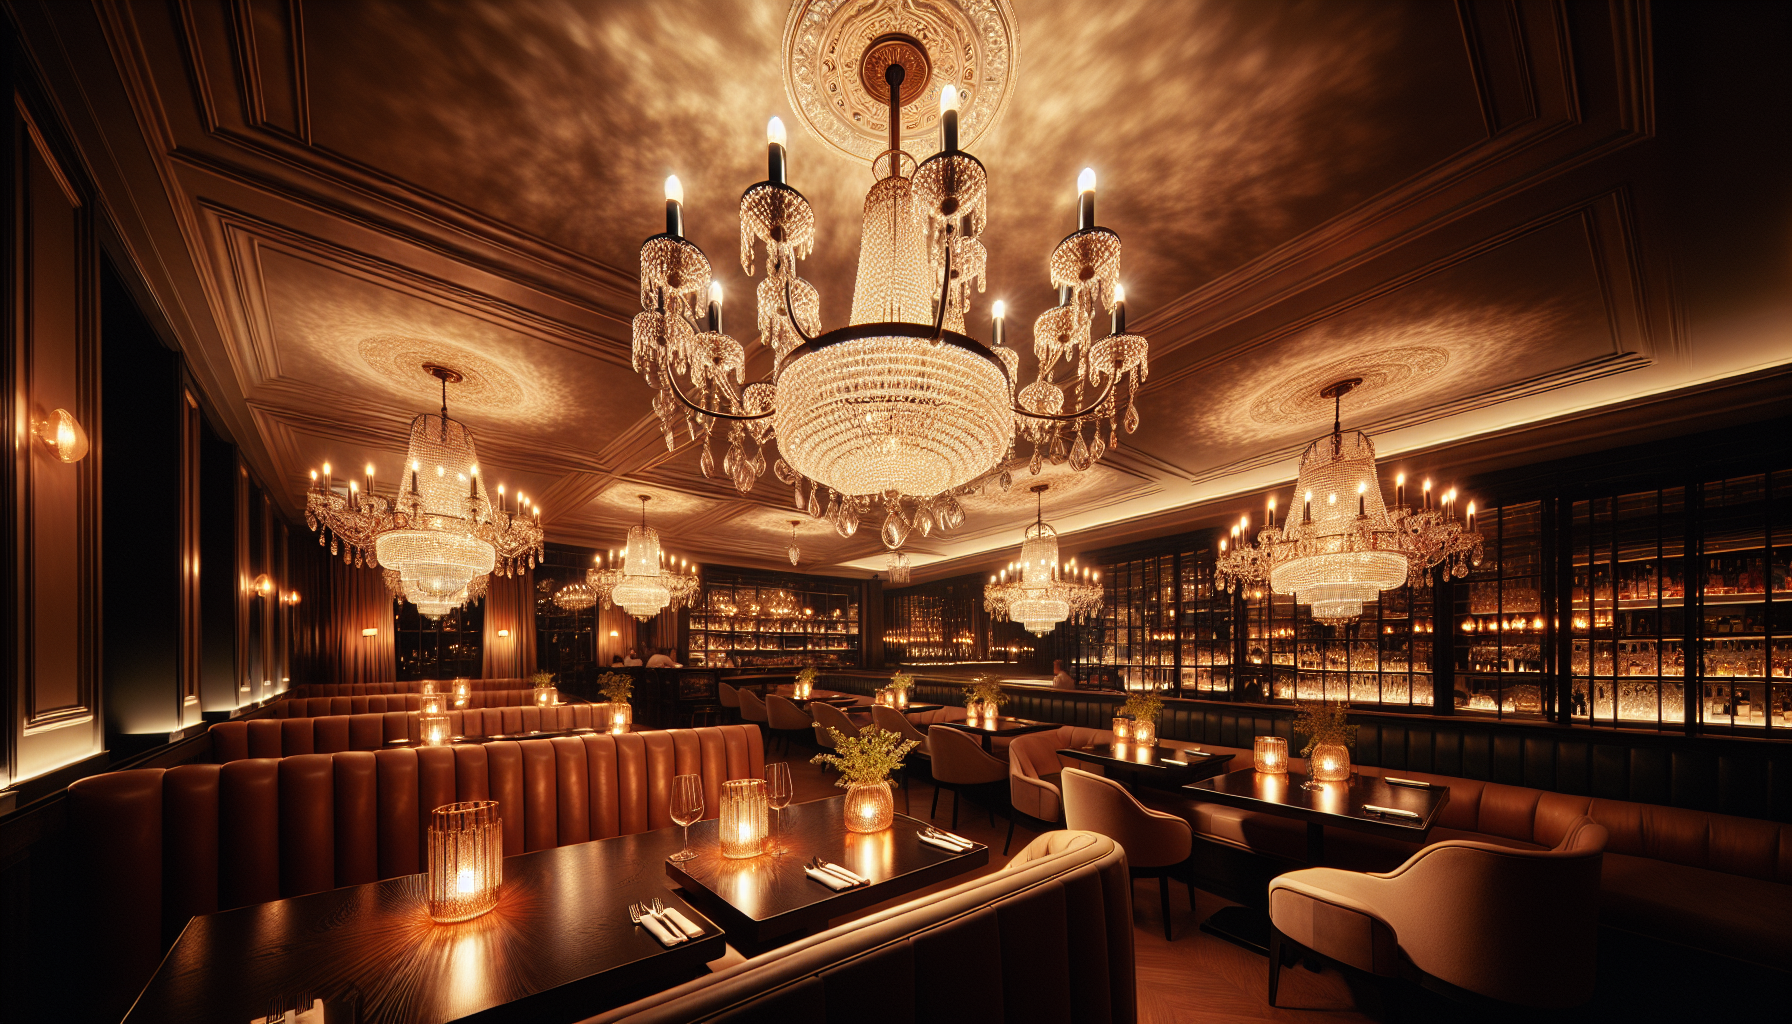 Upscale restaurant lighting with chandeliers and pendant lights